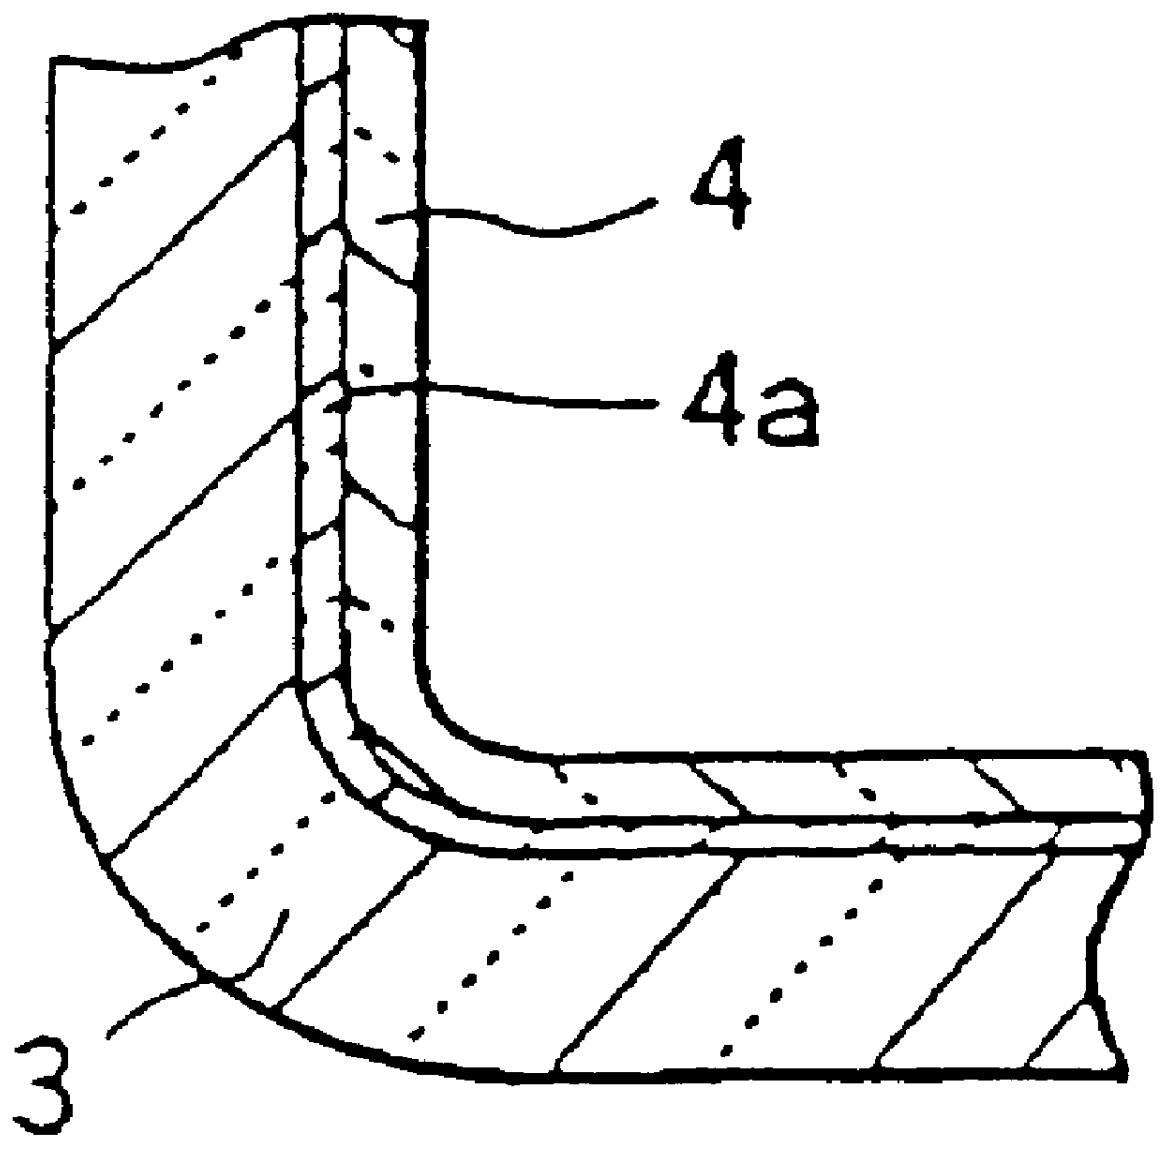 Quartz glass crucible for producing silicone single crystal and method for producing the crucible